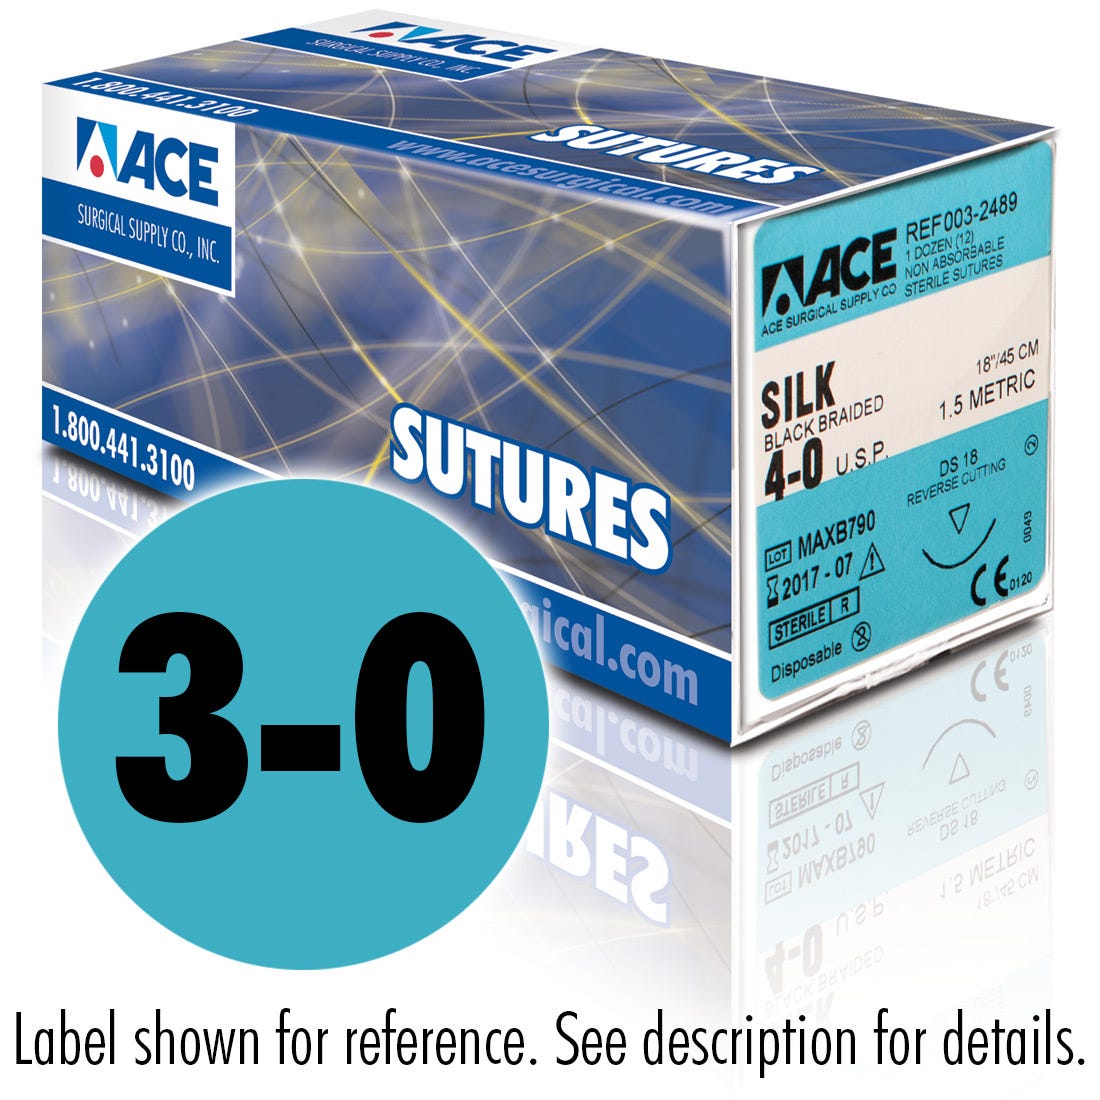 ACE 3-0 Black Braided Silk Sutures, DS24, 18"- 12/Box